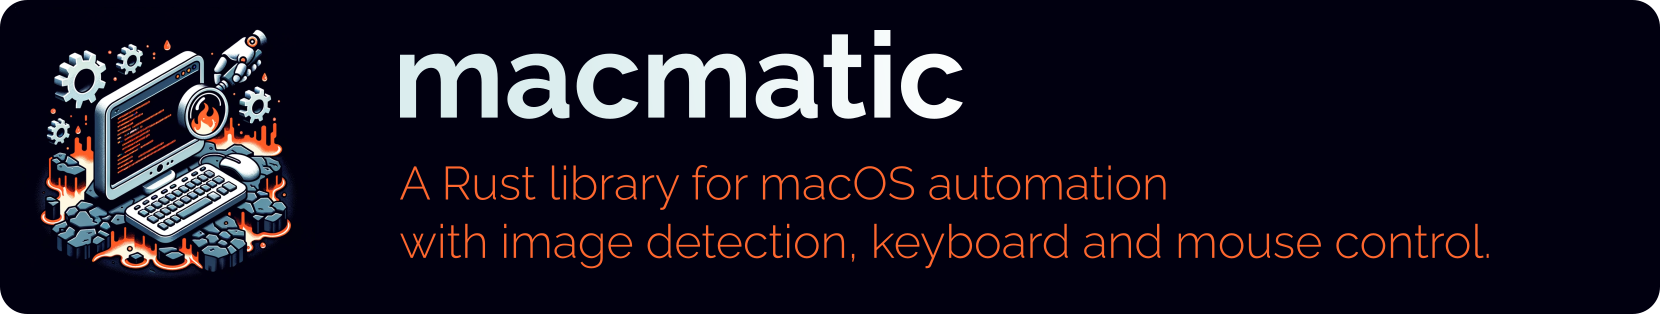 macmatic: A Rust library for macOS automation with image detection, keyboard and mouse control